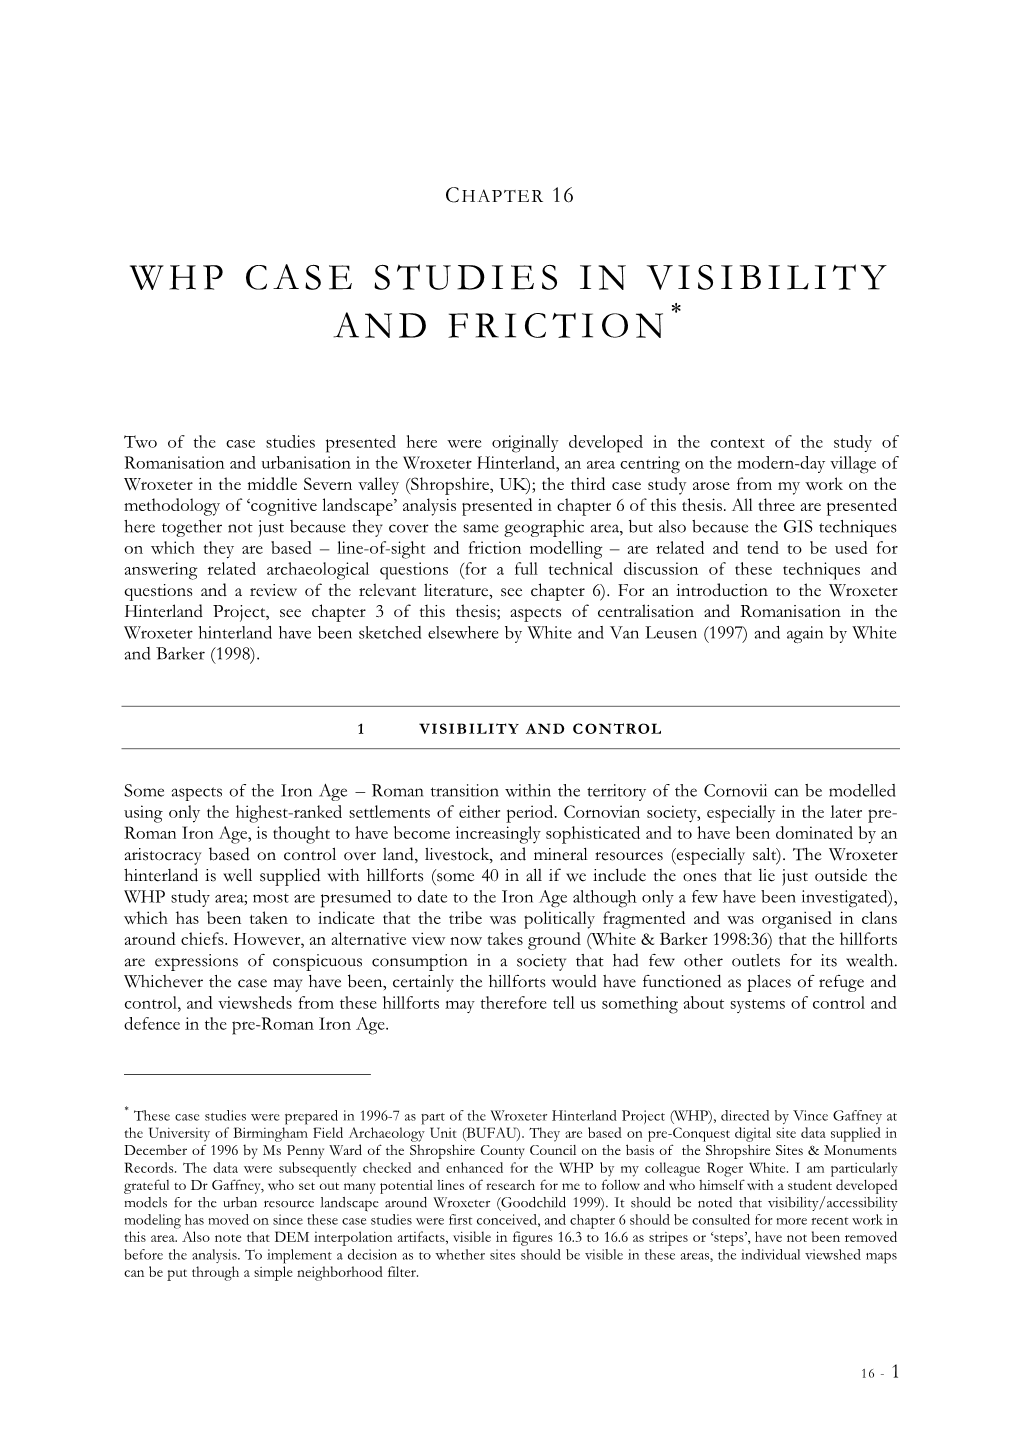 Whp Case Studies in Visibility and Friction *